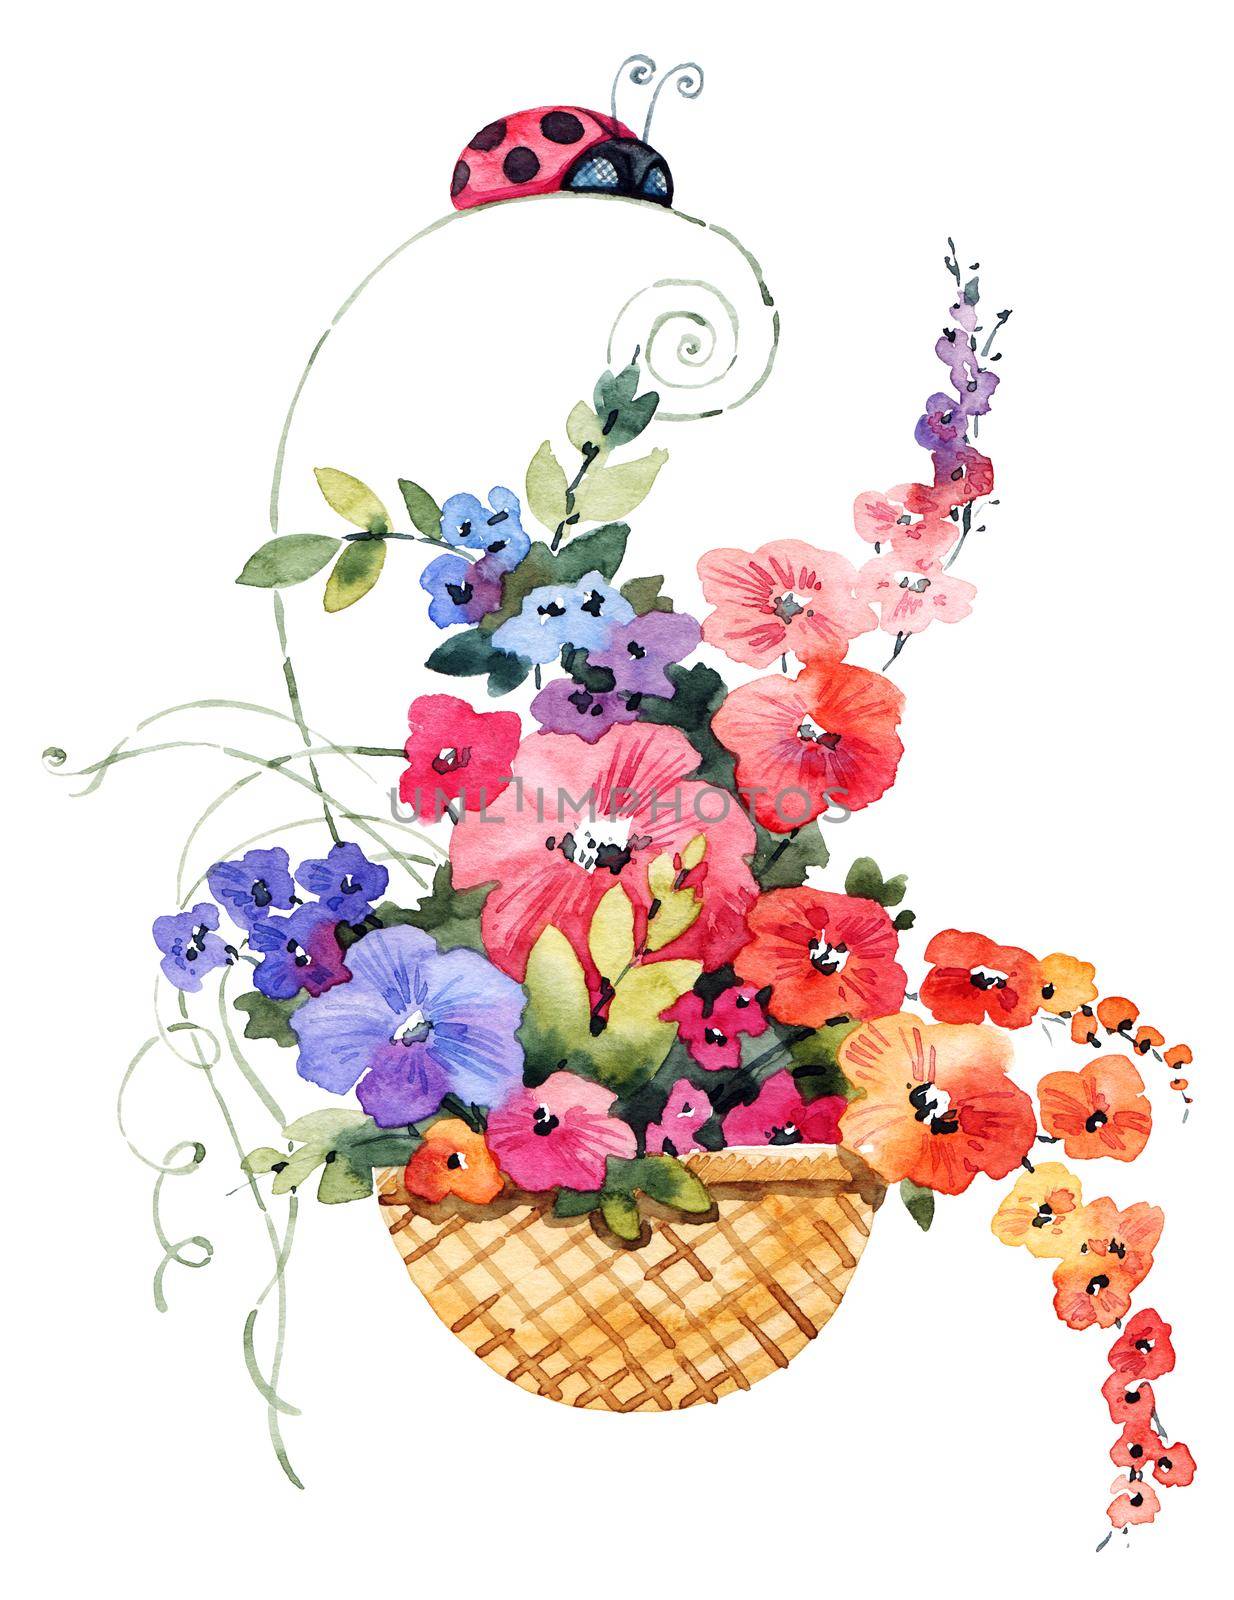 Cute illustration of flowers in basket and ladybug. Design for greeting card. Drawing by watercolor.